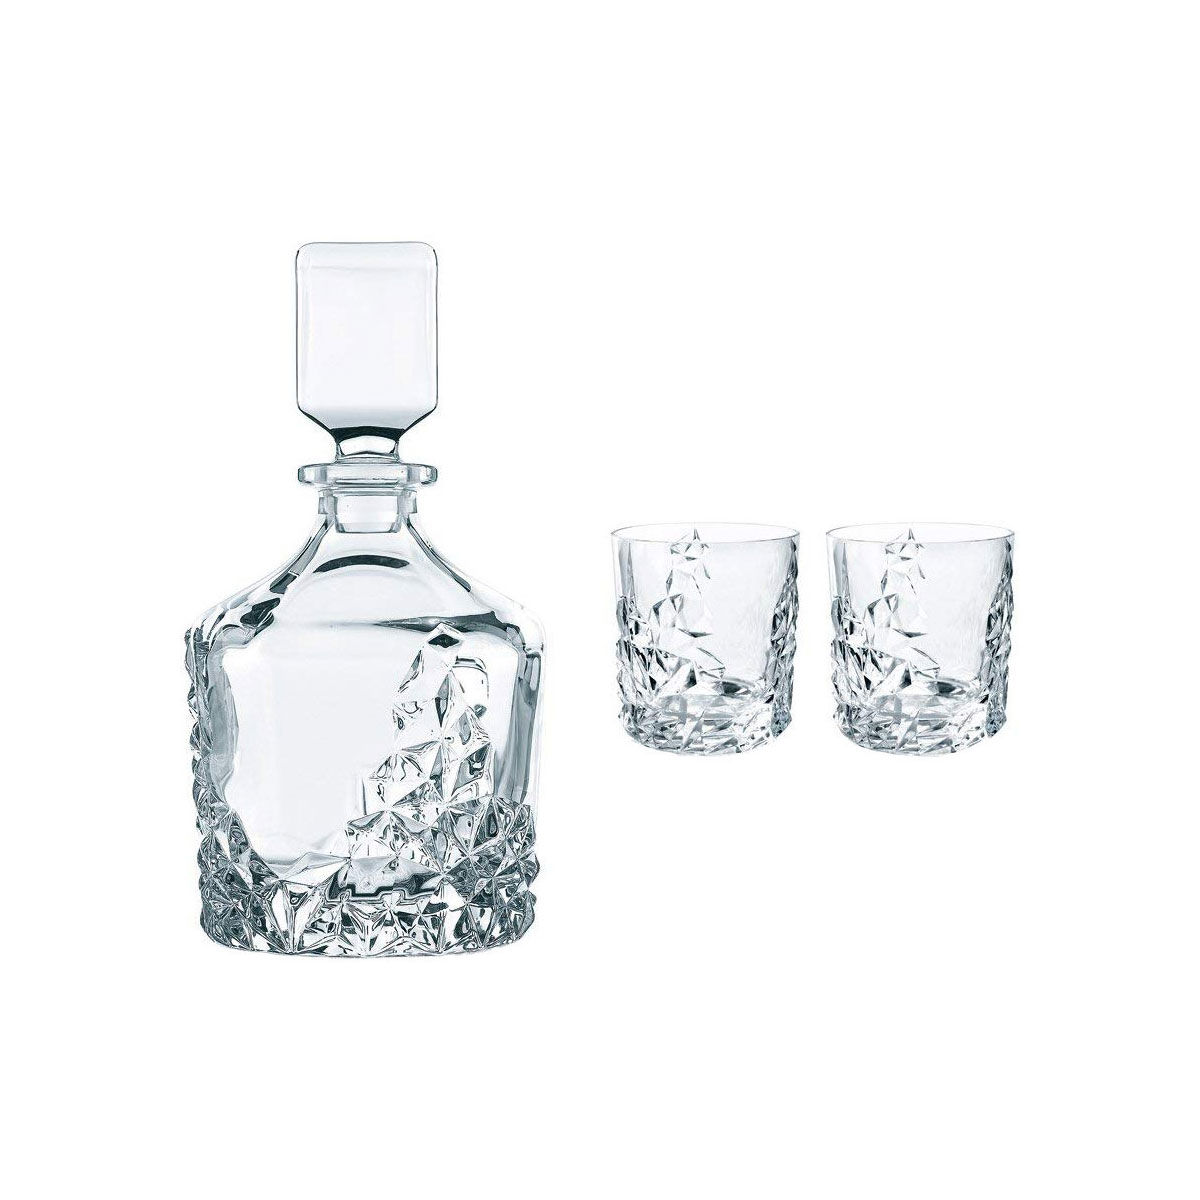 Nachtmann Sculpture Decanter and 2 Whiskey Tumblers, Set of 3